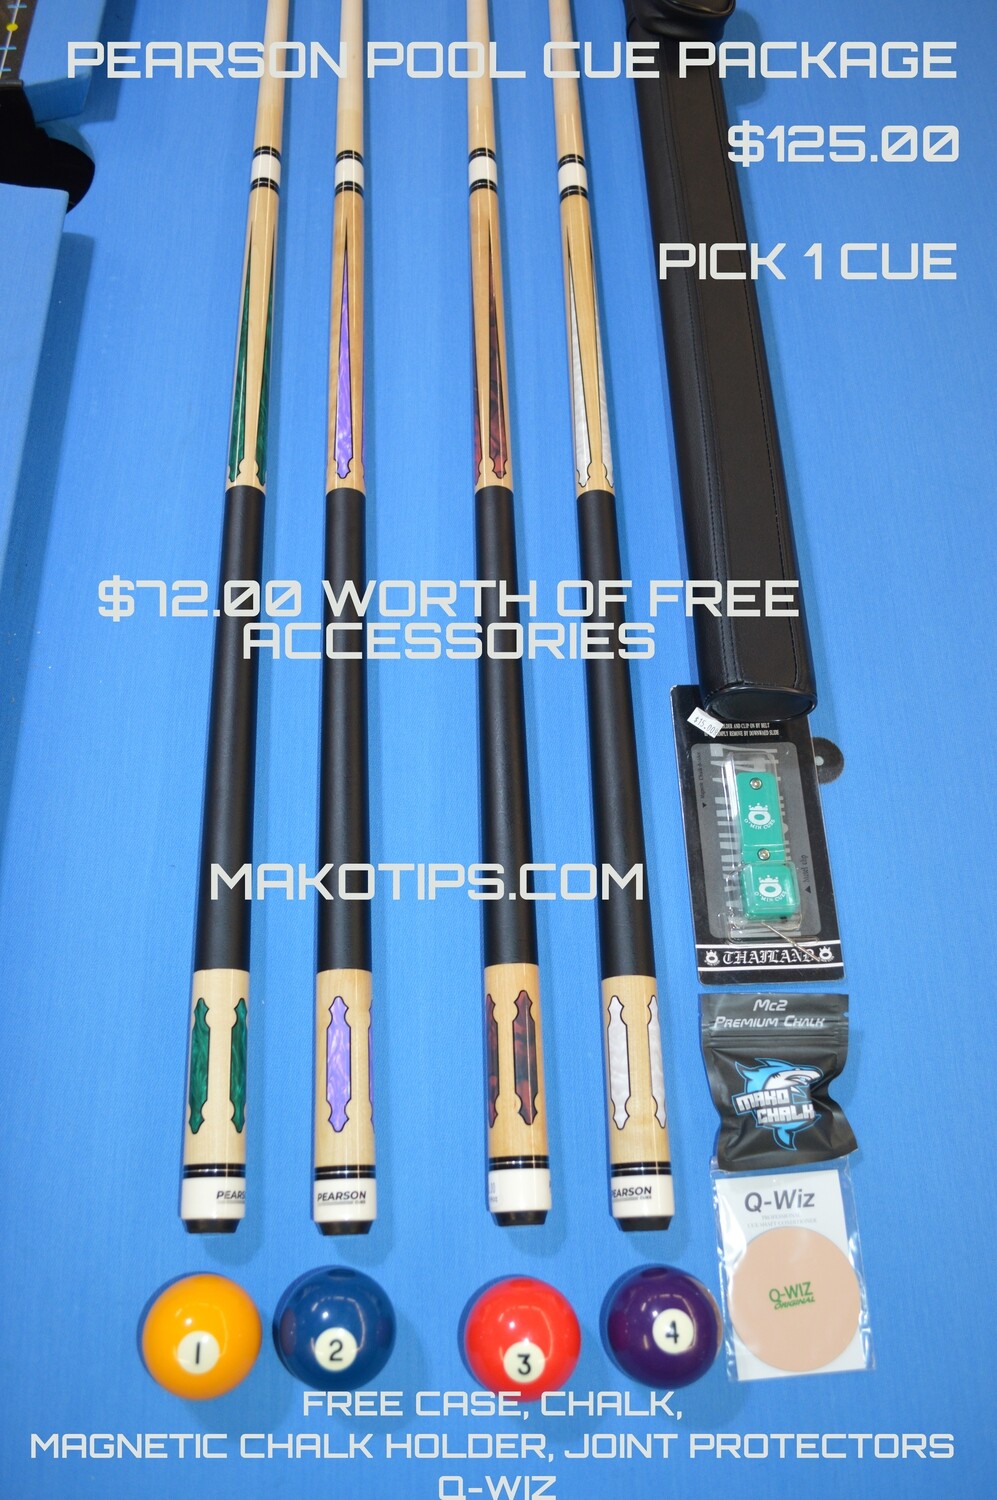 Pearson pool cue package